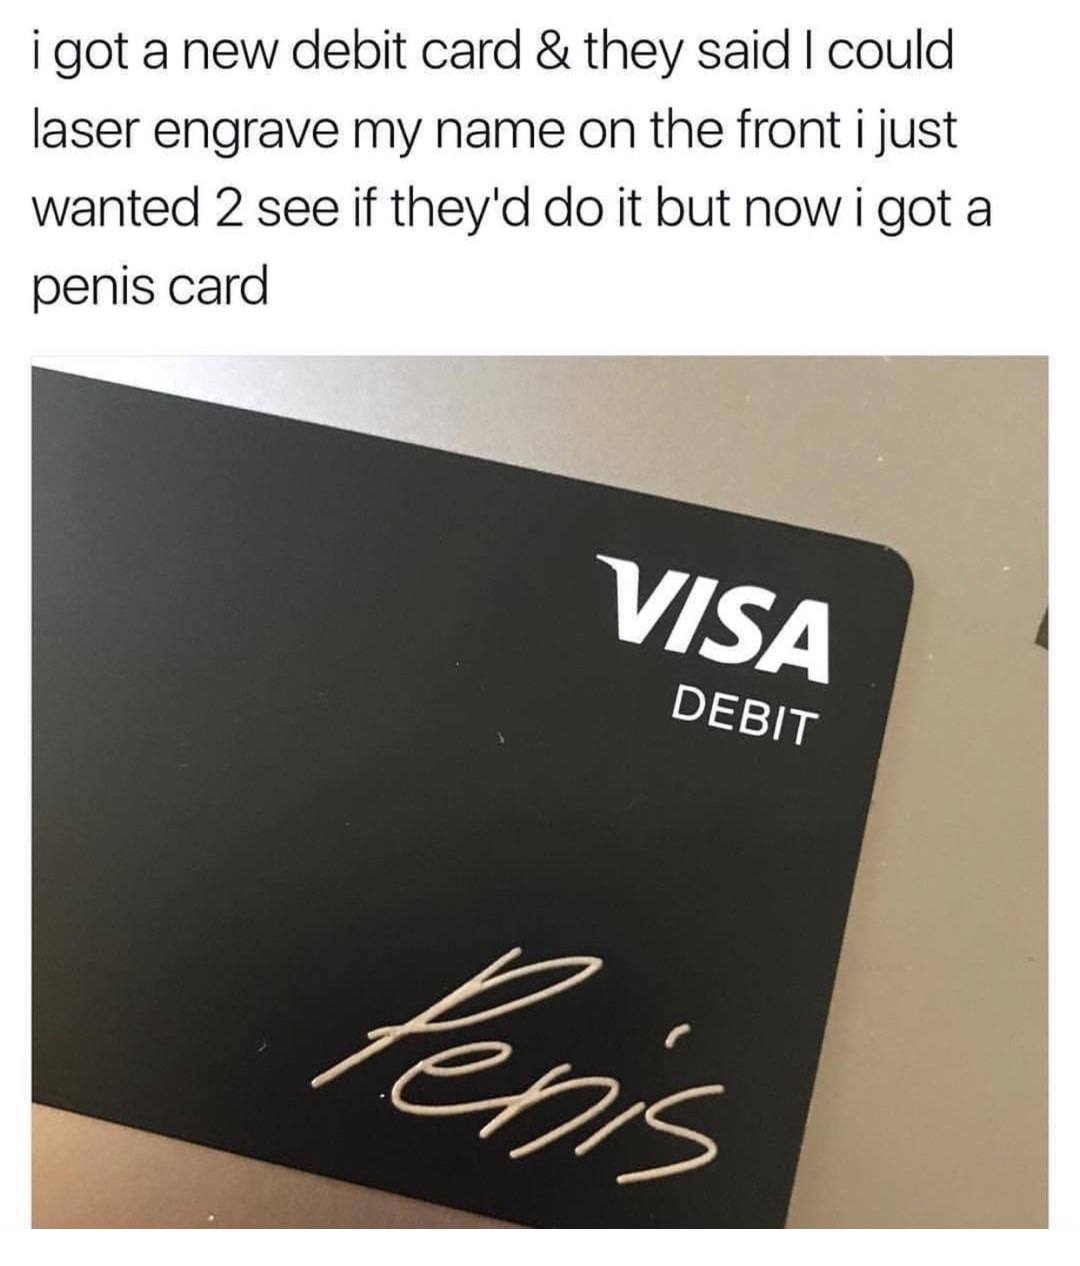 Savage memes - of a cash app card penis - i got a new debit card & they said I could laser engrave my name on the front i just wanted 2 see if they'd do it but now i got a penis card Visa Debit